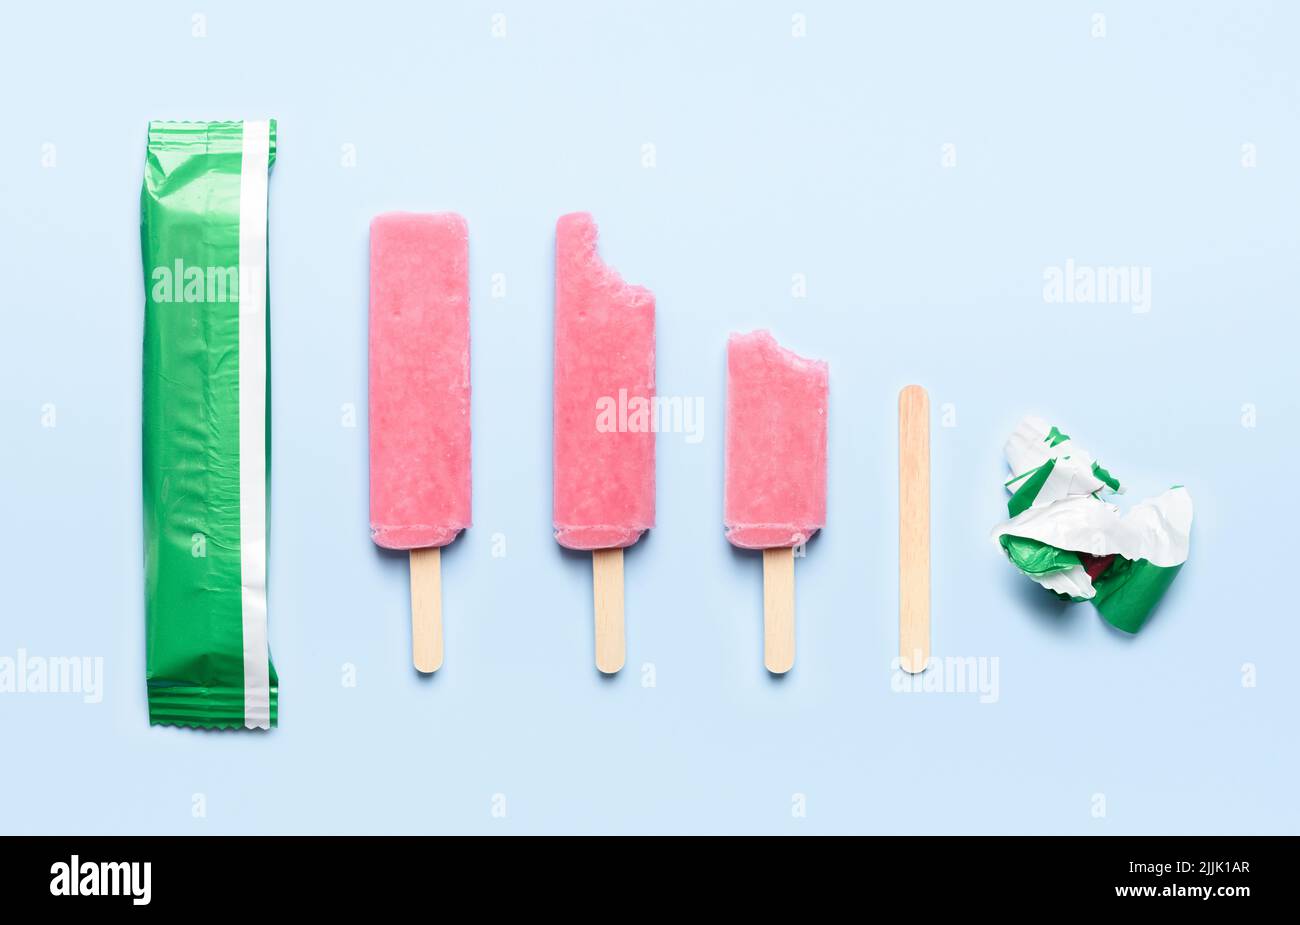 Pink popsicle ice cream on wooden stick at different states of consumption life cycle on blue background top view flat lay Stock Photo